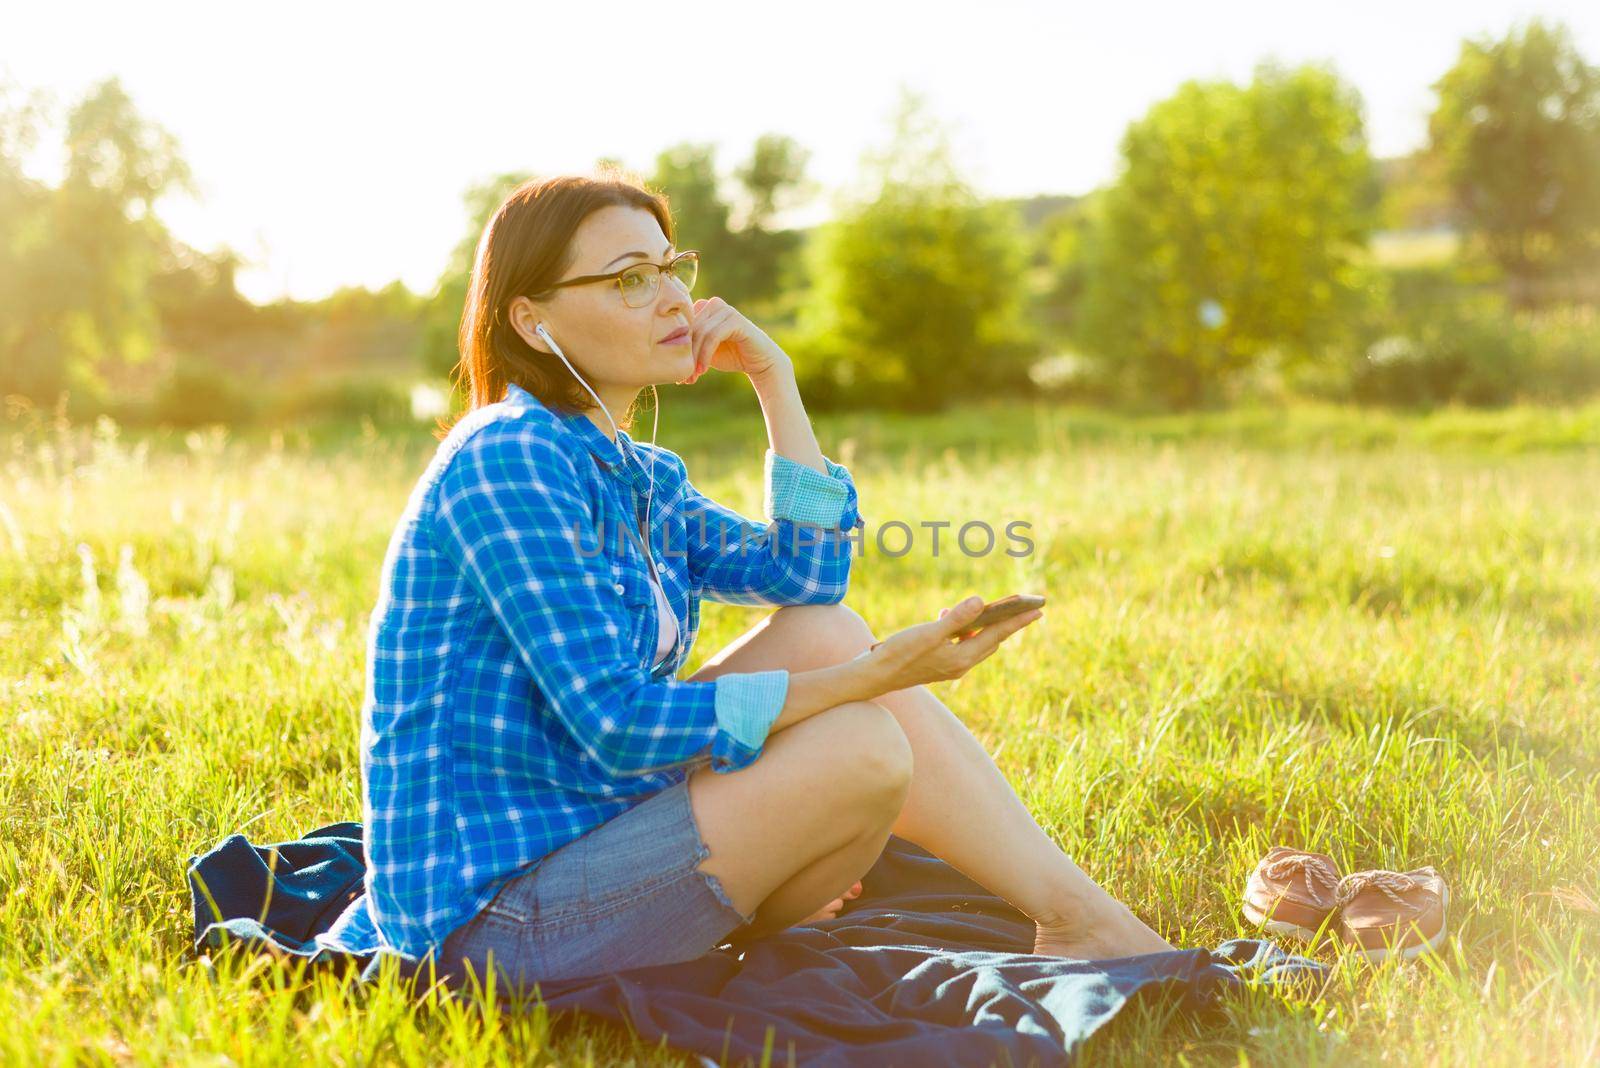 Mature woman listens to music, an audiobook on headphones, relaxes in nature. by VH-studio